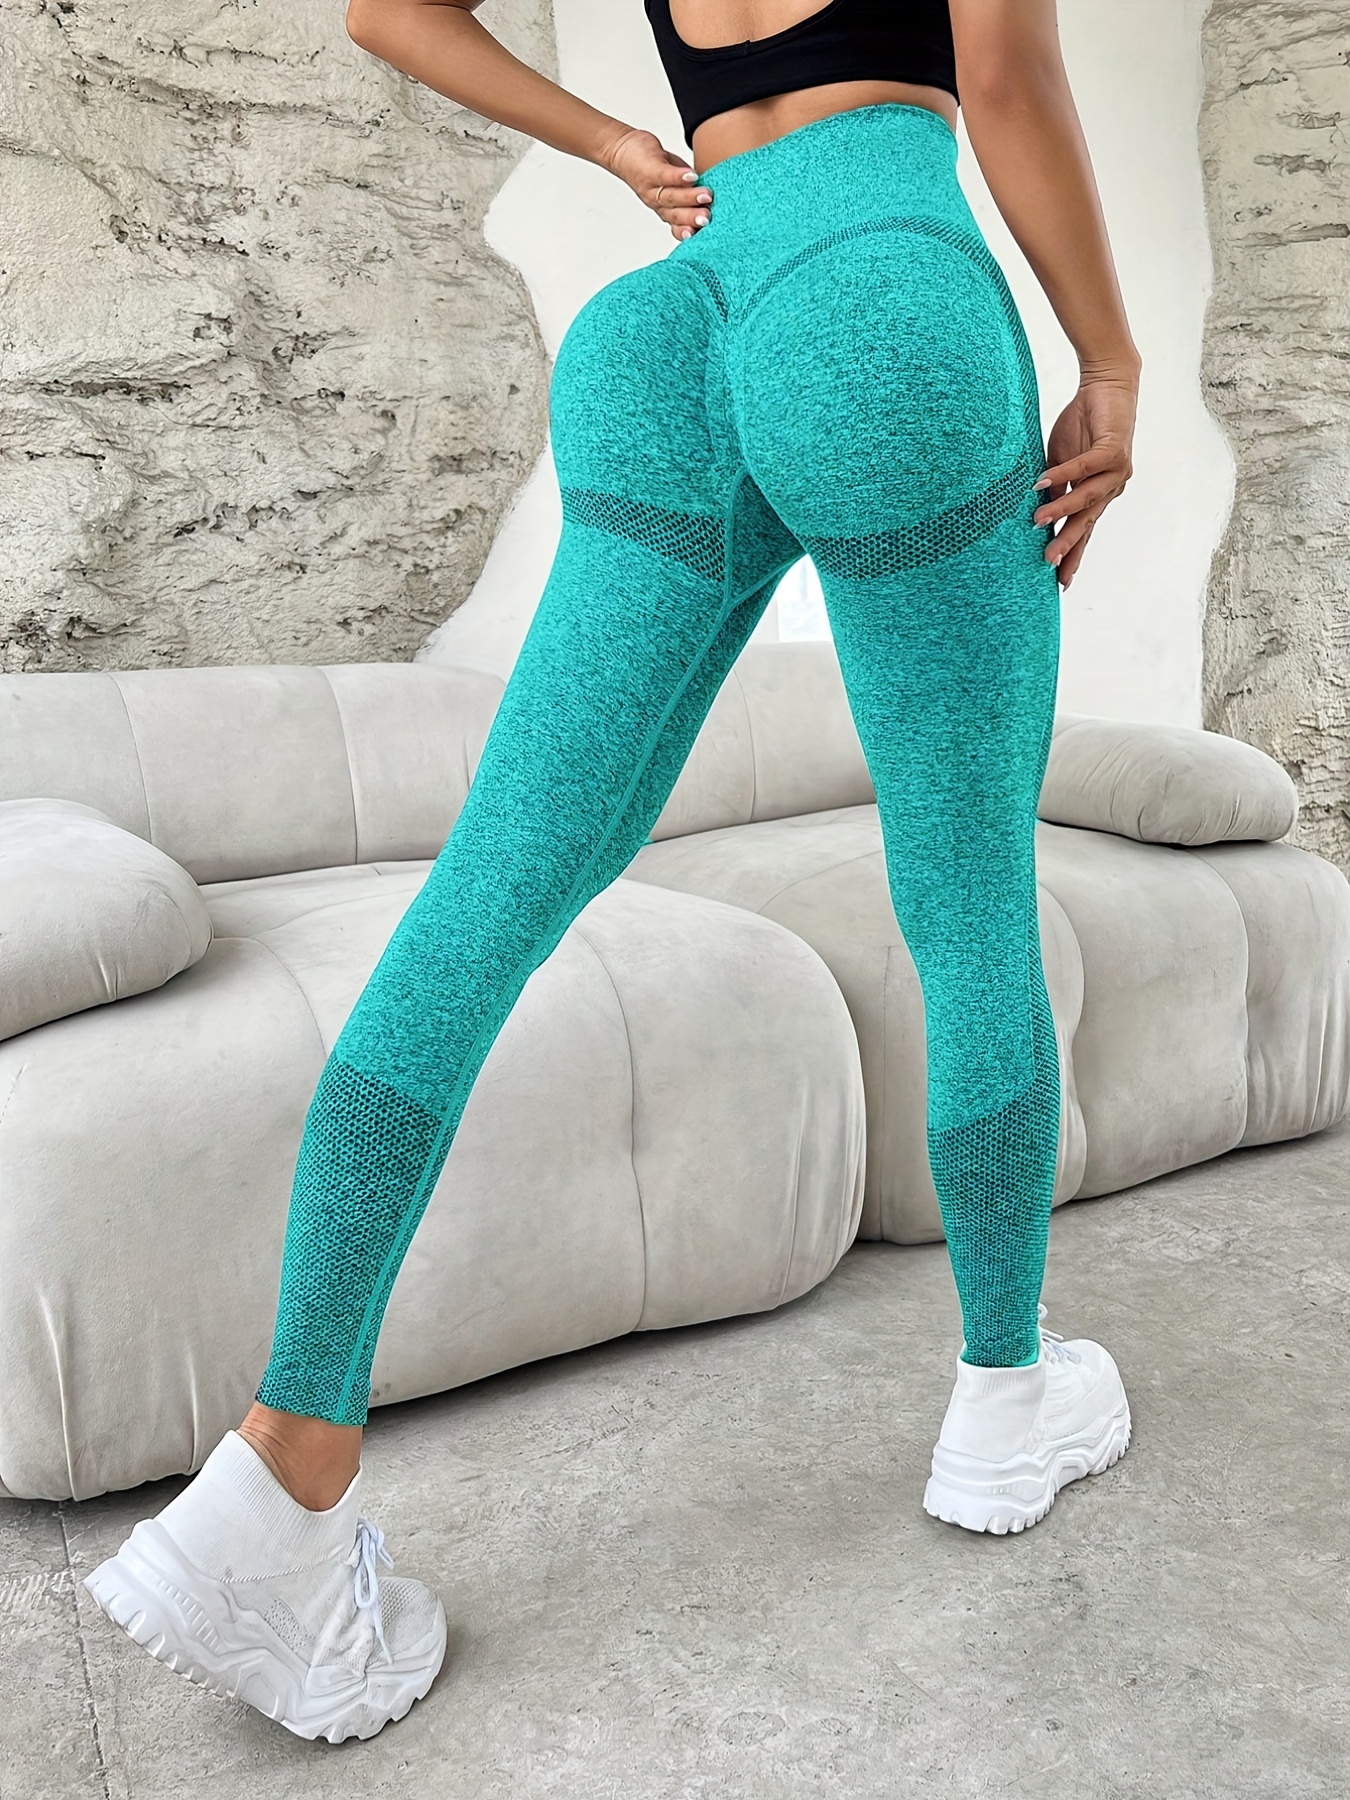 GETOUT Yoga Pant for Women in Or Color Tight Hip Lifting Sport Pants Yoga  Pants with Print